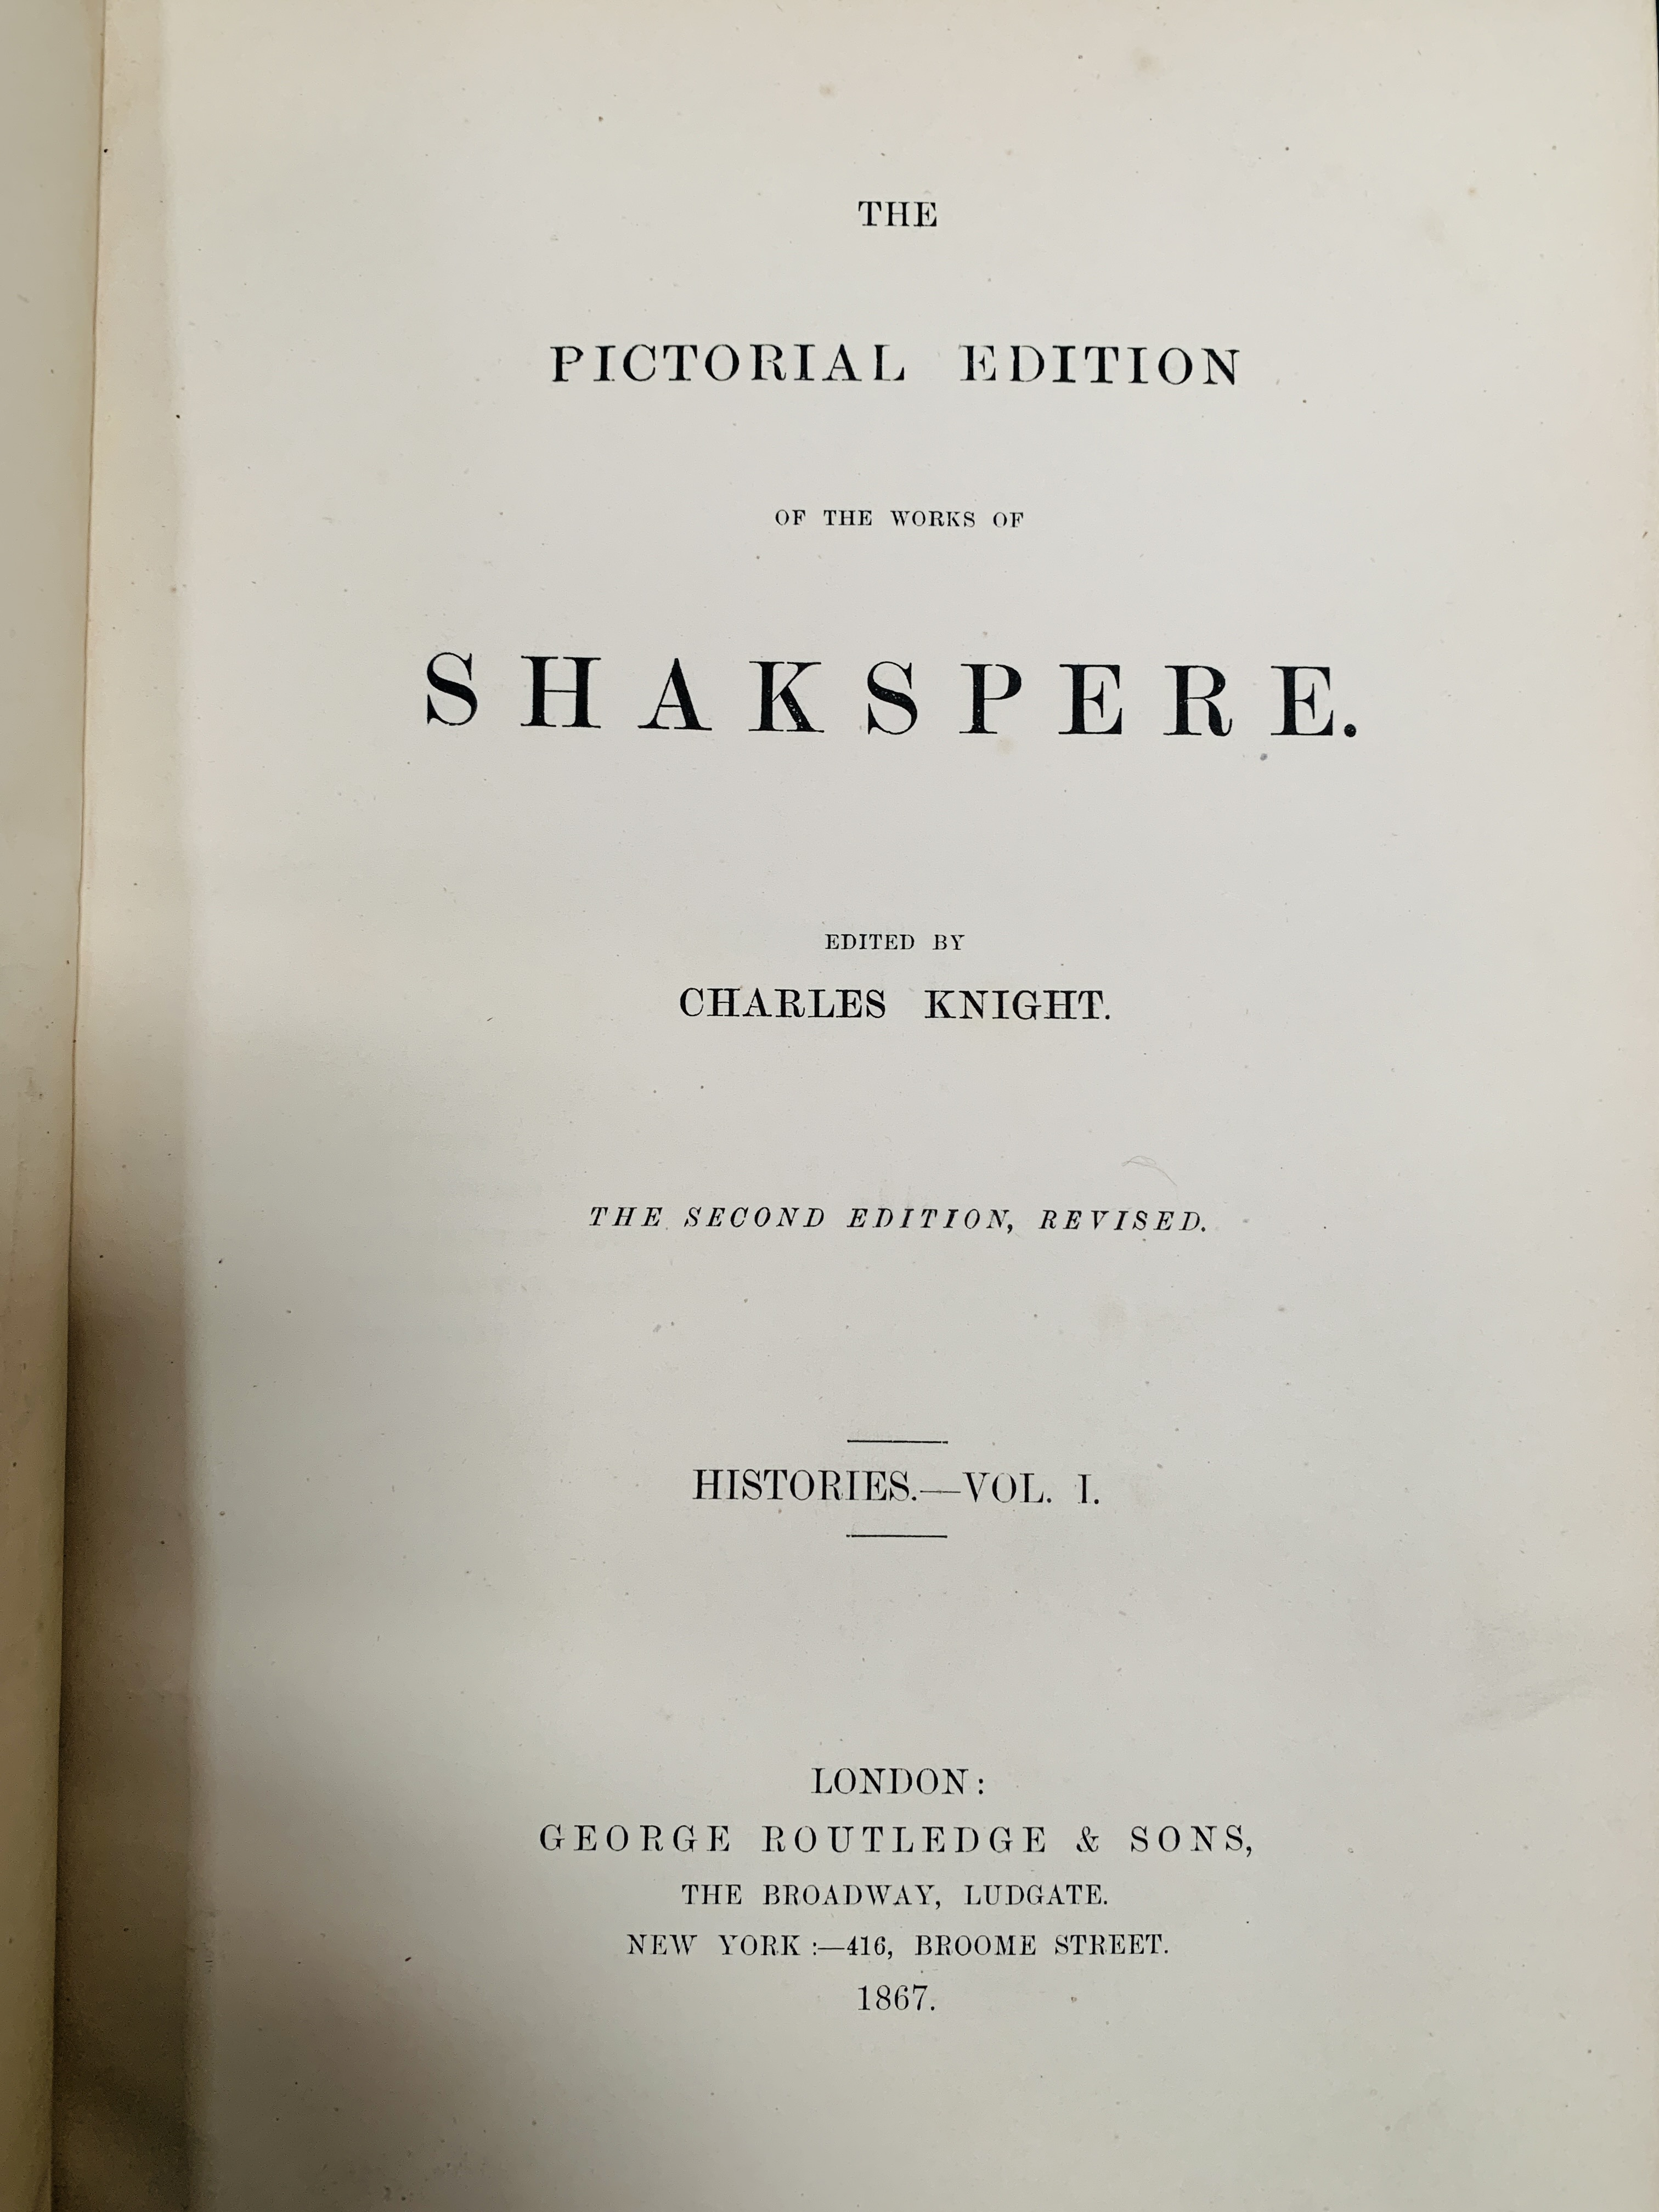 The Pictorial Edition of The Works of Shakspere, edited by Charles Knight, 8 volumes, 1867 - Image 2 of 6